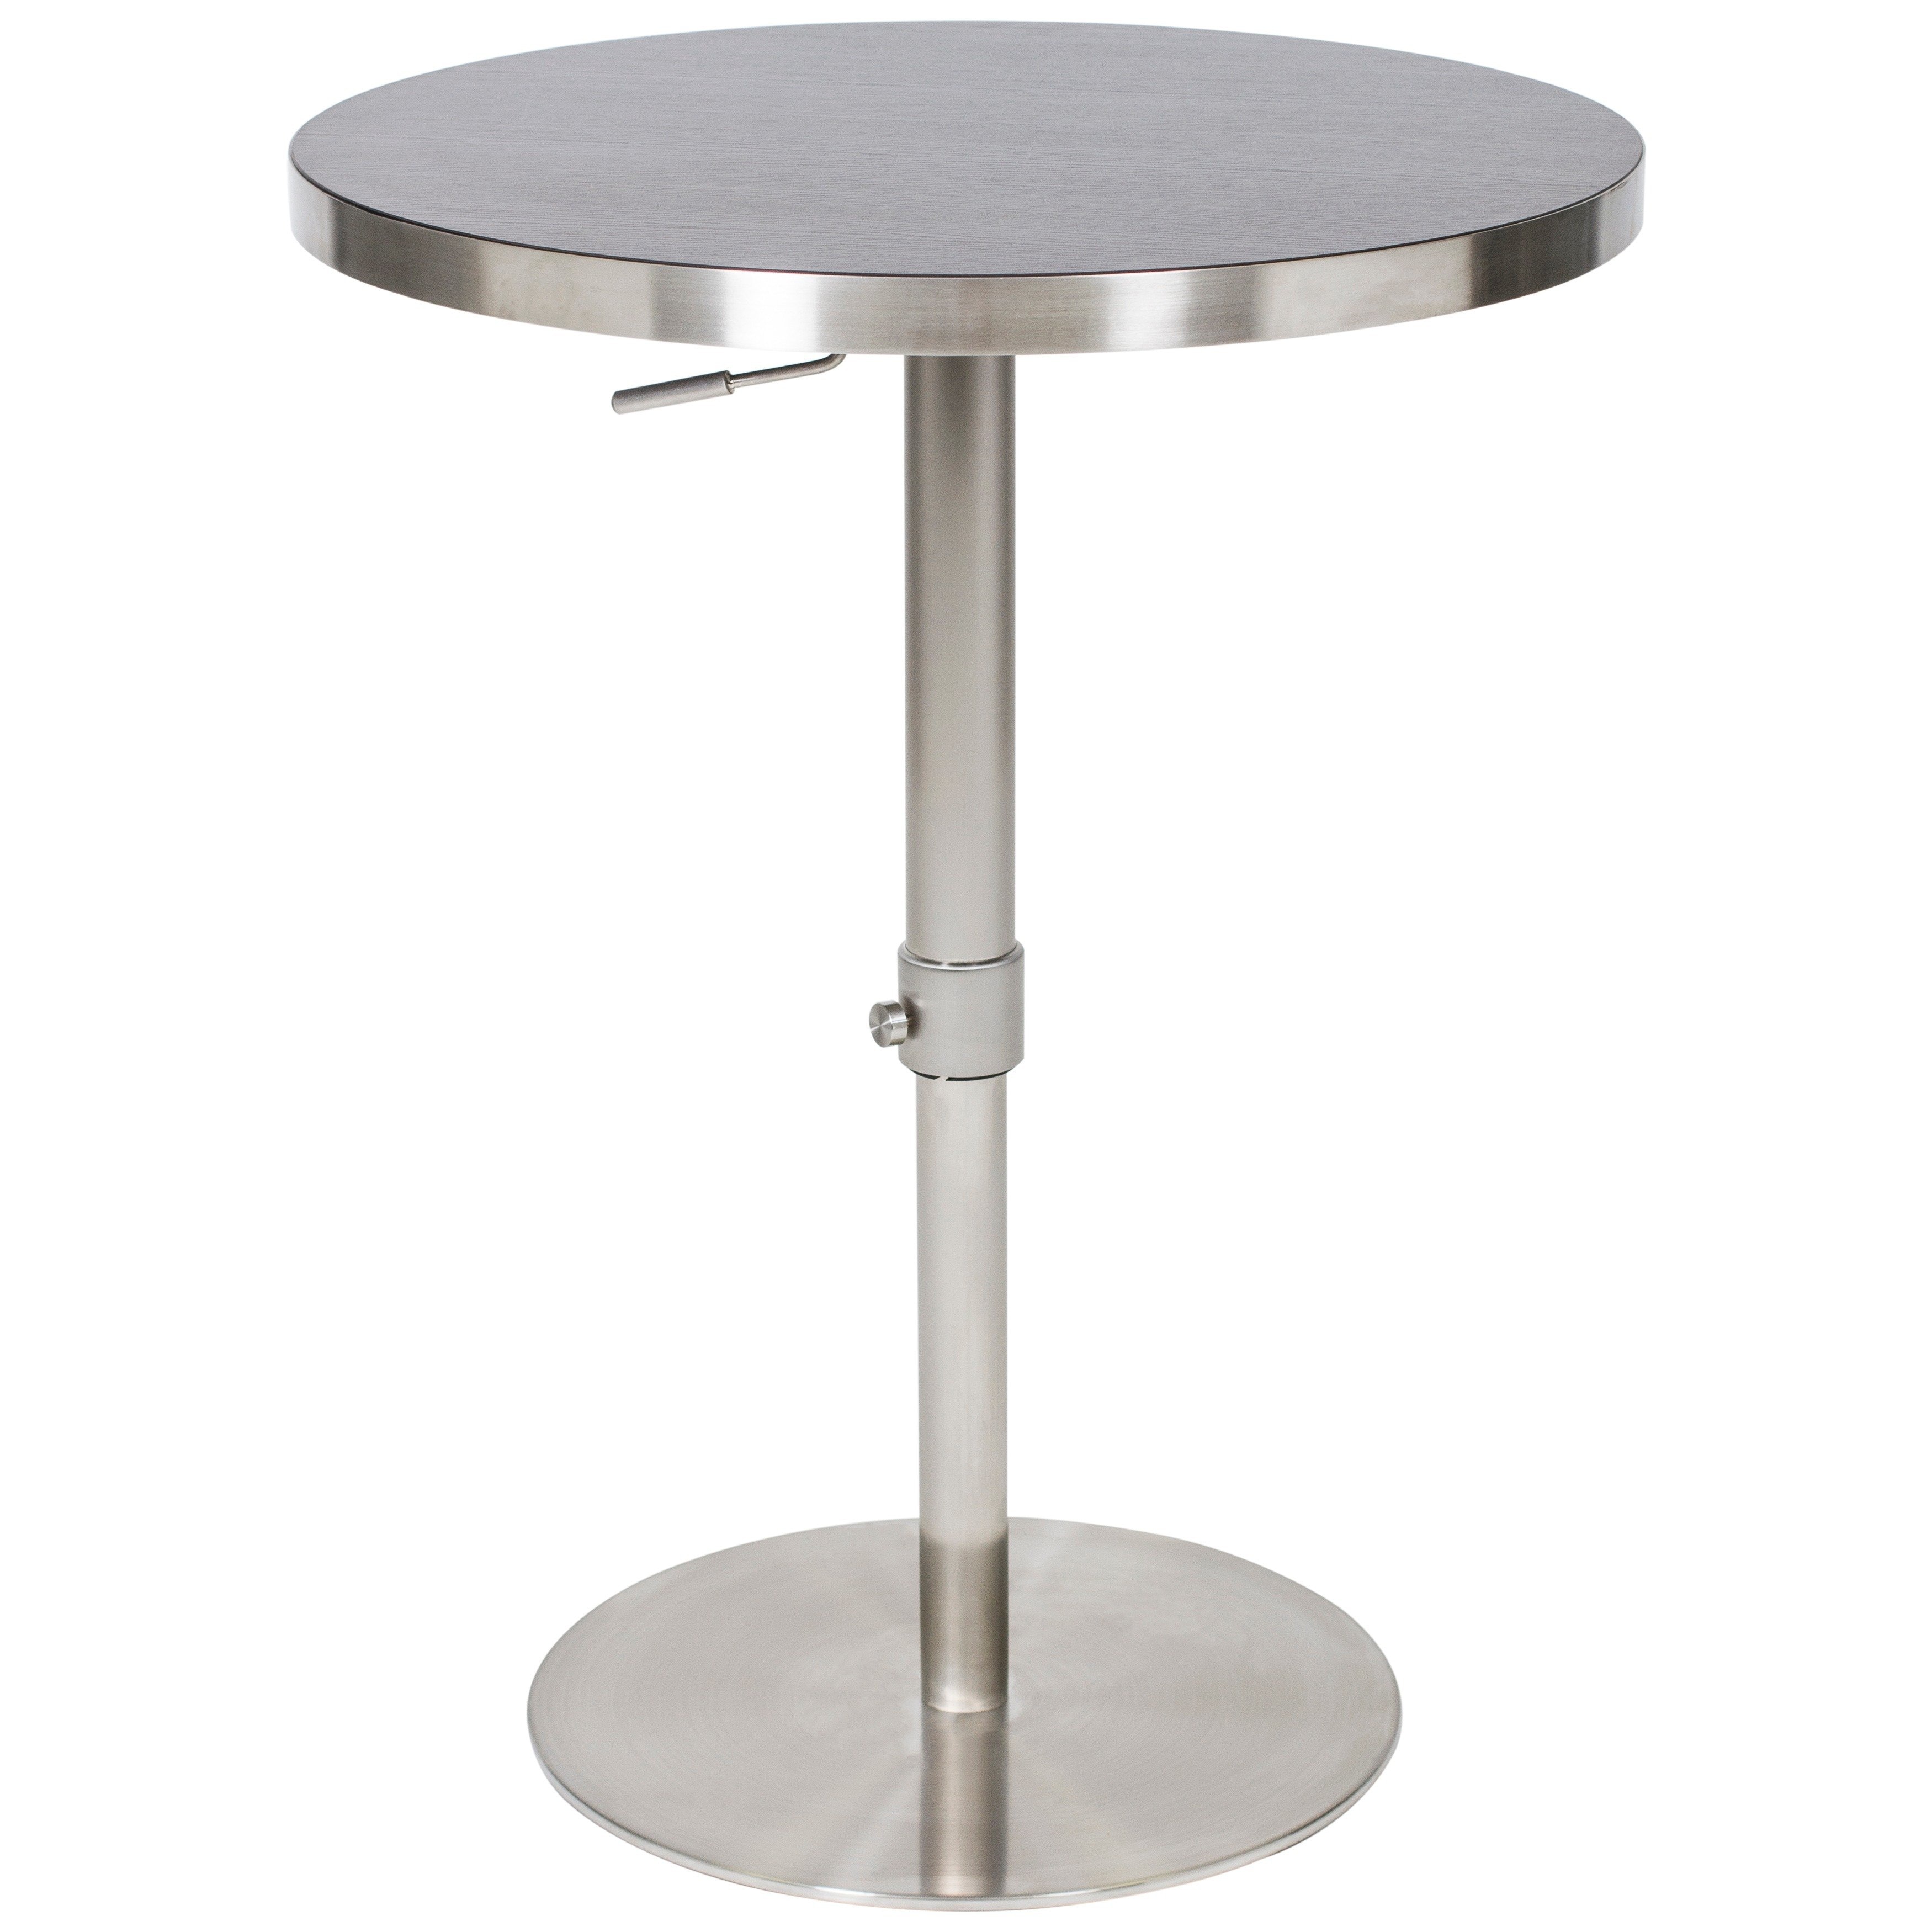 mix inch adjustable height round espresso wood melamine veneer brushed stainless steel pub table with slab base accent free shipping today wrought iron target standing lamp glass